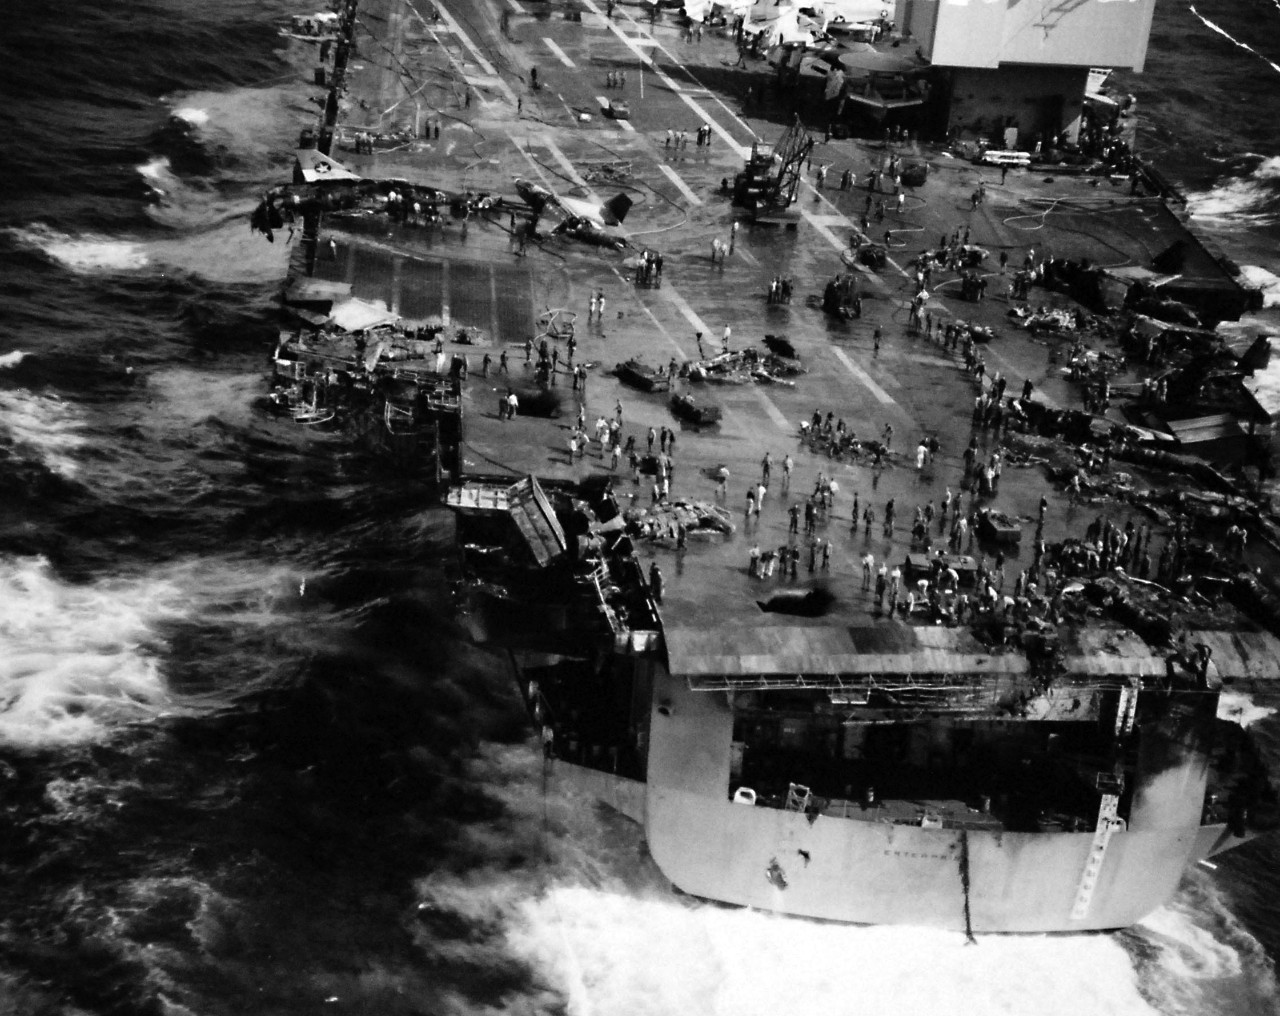 428-GX-KN-17590:    USS Enterprise (CVAN-65), January 1969.     Pacific Ocean.  Fire damage on board the flight deck of USS Enterprise (CVAN-65).  The aircraft was destroyed as the ship was conducting air operations 75 miles south of Pearl Harbor.   Photographed by PH2 Stanley C. Wyckoff, January 14, 1969.       Official U.S. Navy photograph, now in the collections of the National Archives.   (2016/07/26).